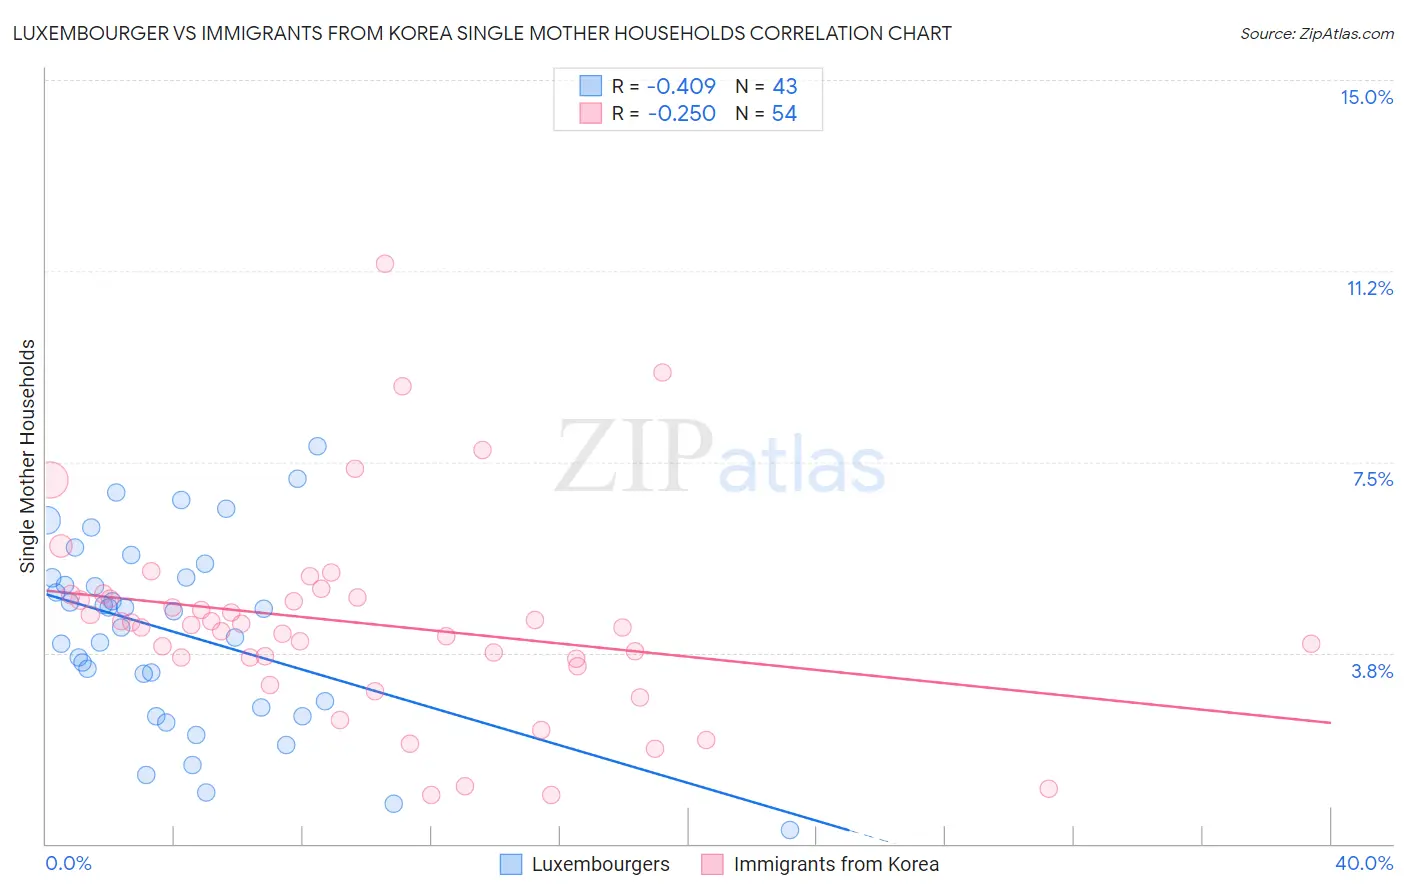 Luxembourger vs Immigrants from Korea Single Mother Households